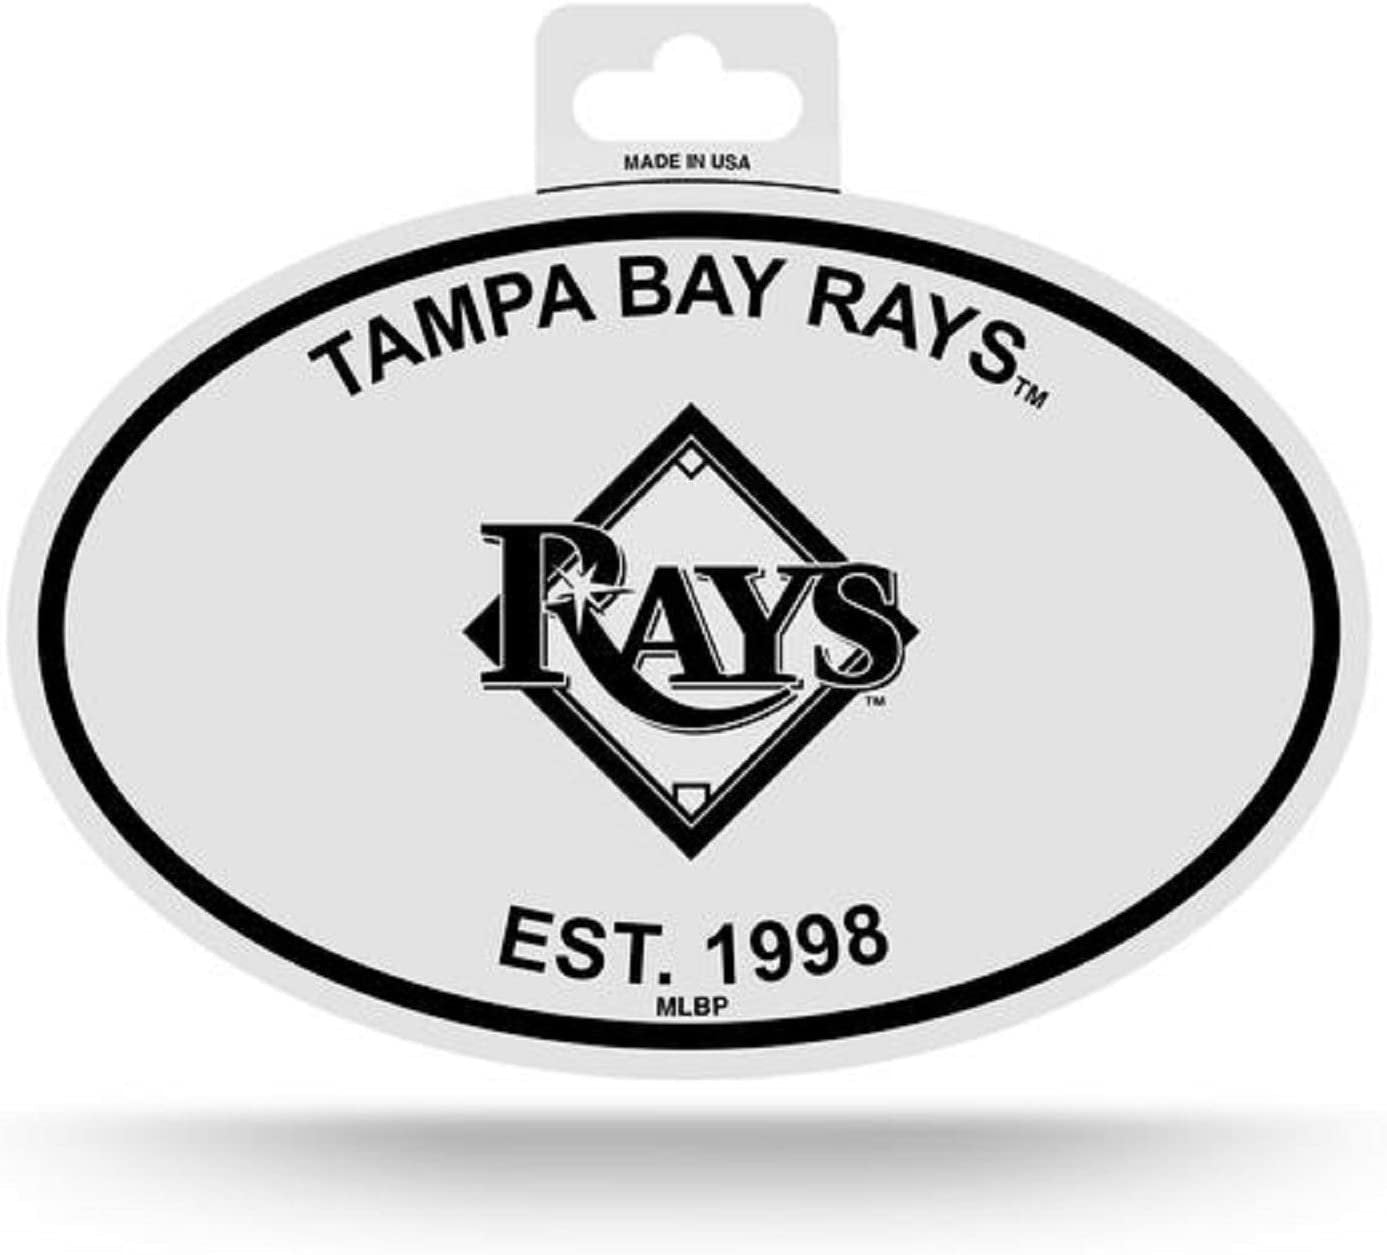 Tampa Bay Rays Black and White Team Logo Oval Sticker Decal, 3.75x5.75 Inch, Full Adhesive Backing